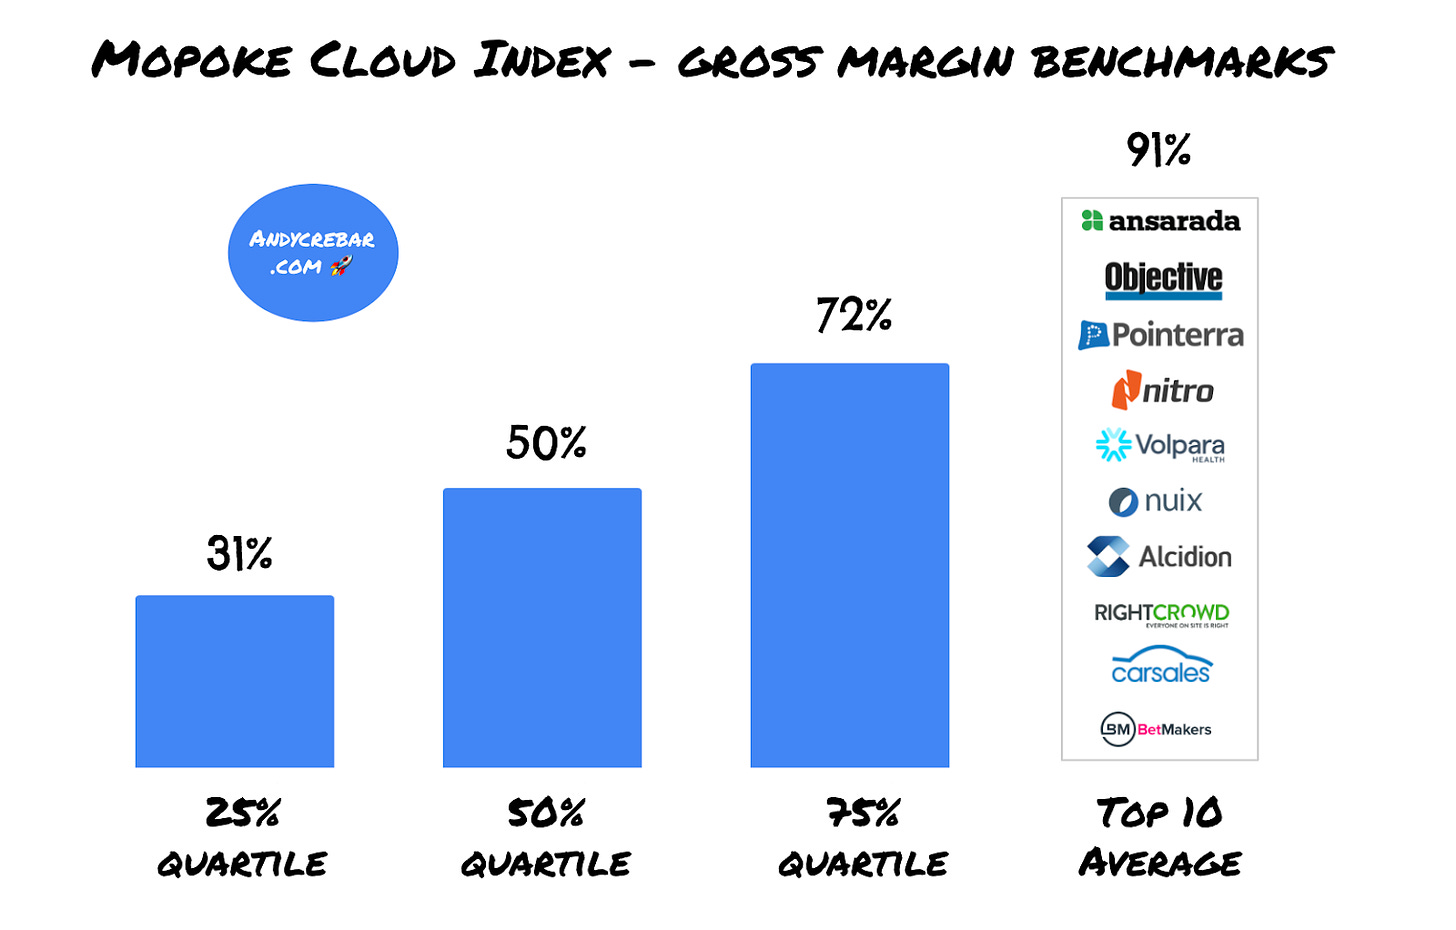 Mopoke Cloud Index - Gross Margin Benchmarks for ASX technology companies